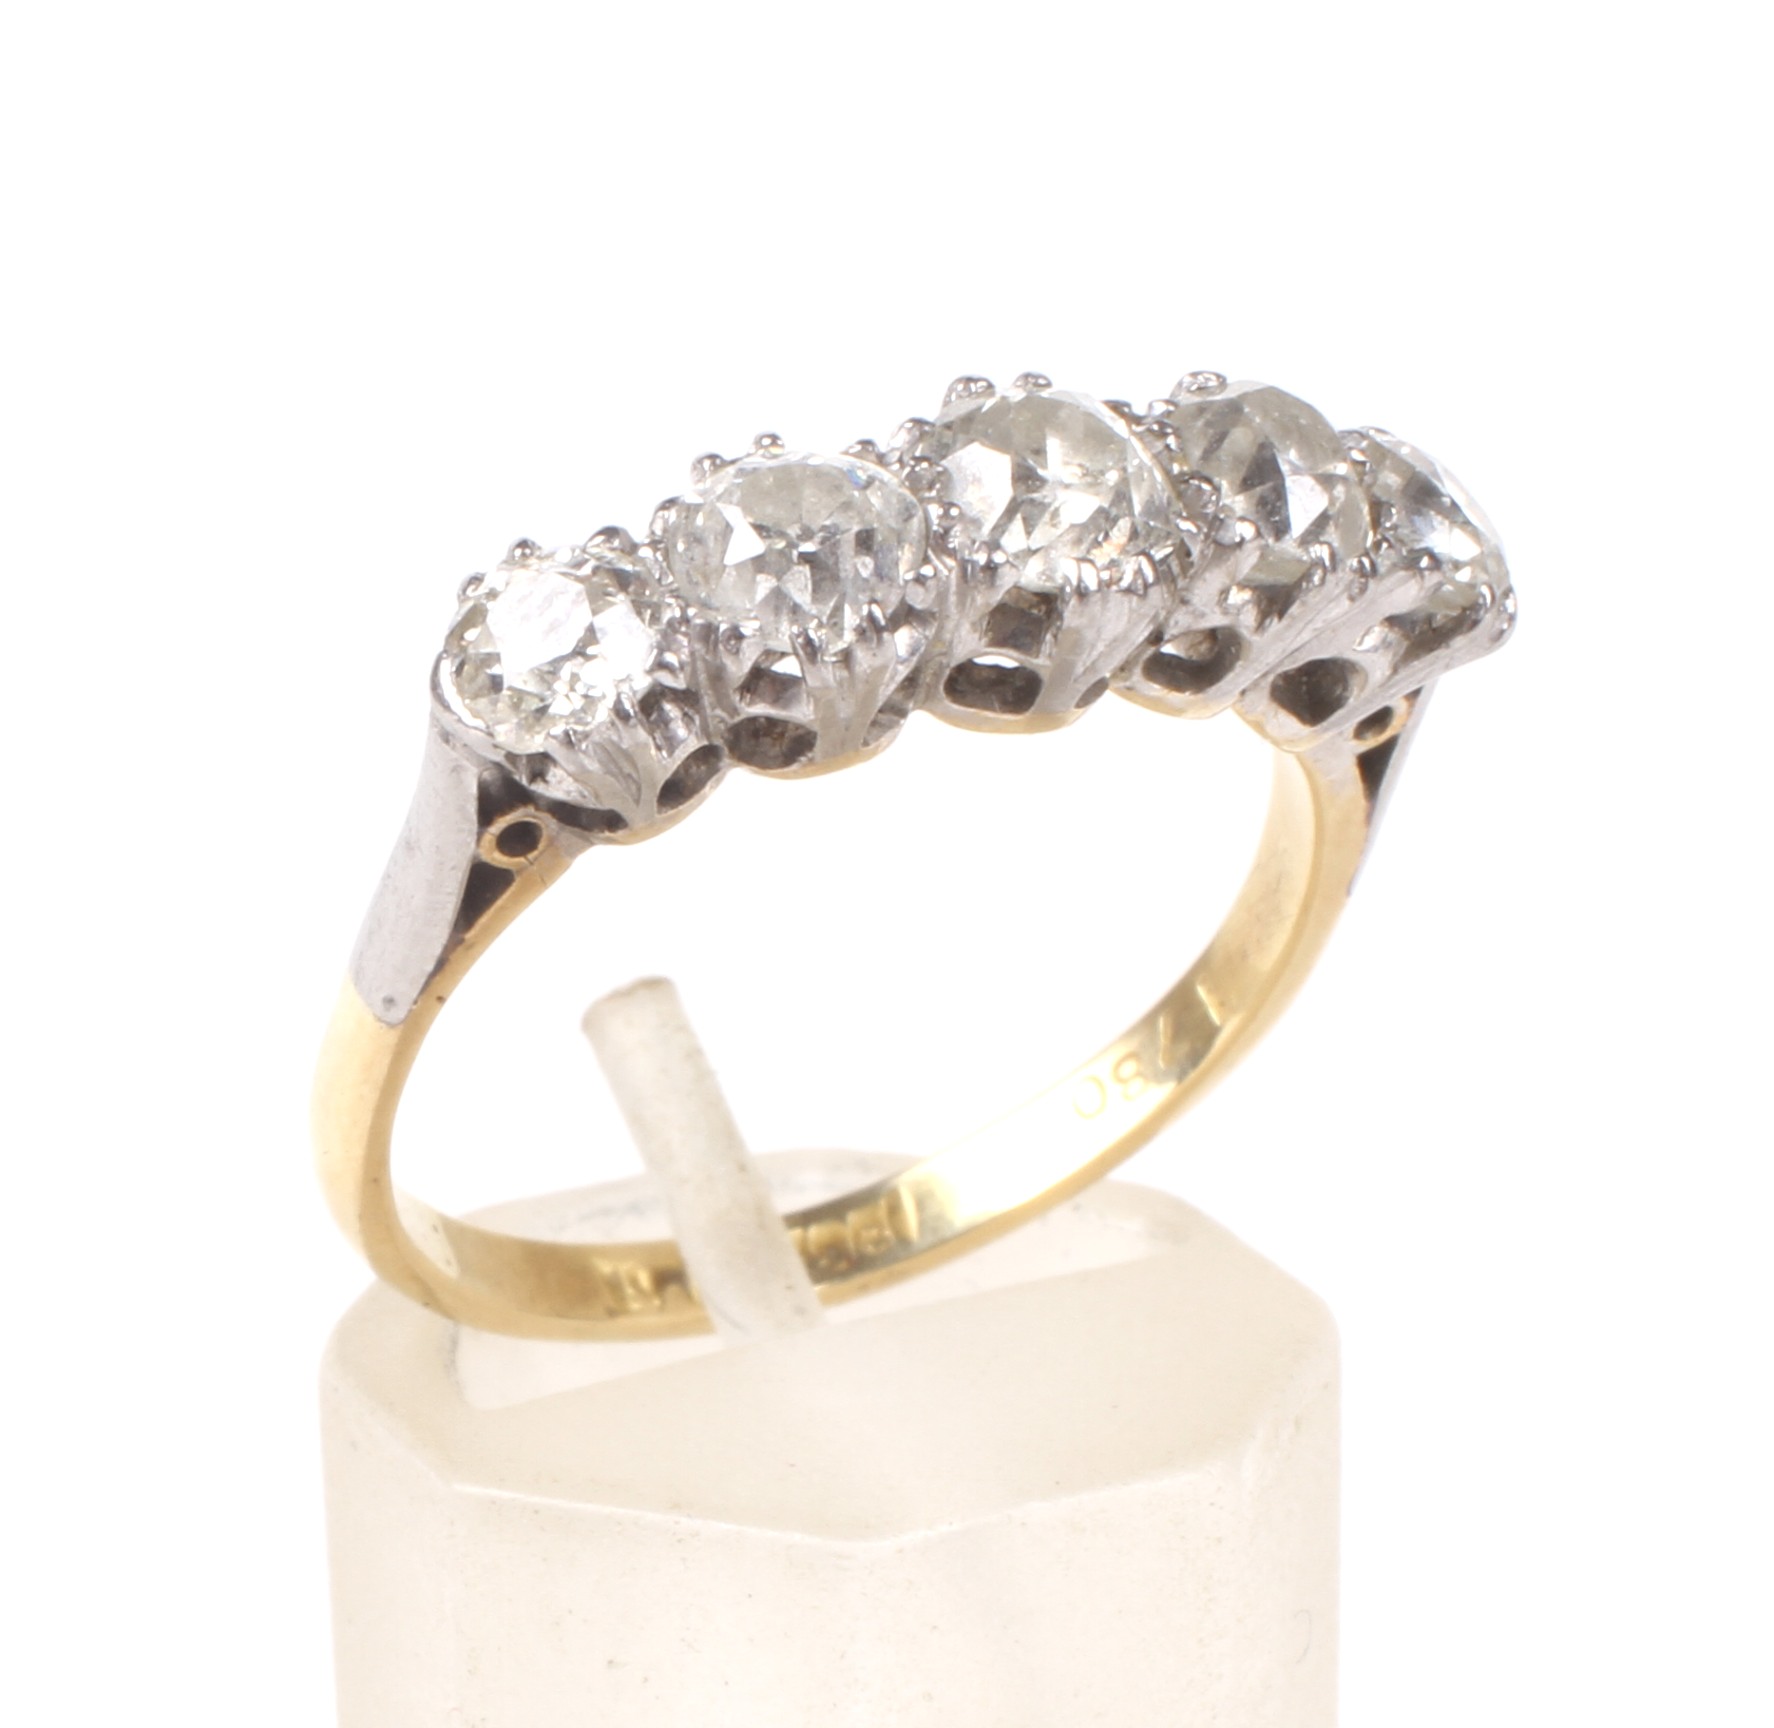 An early 20th century gold and diamond five stone ring.